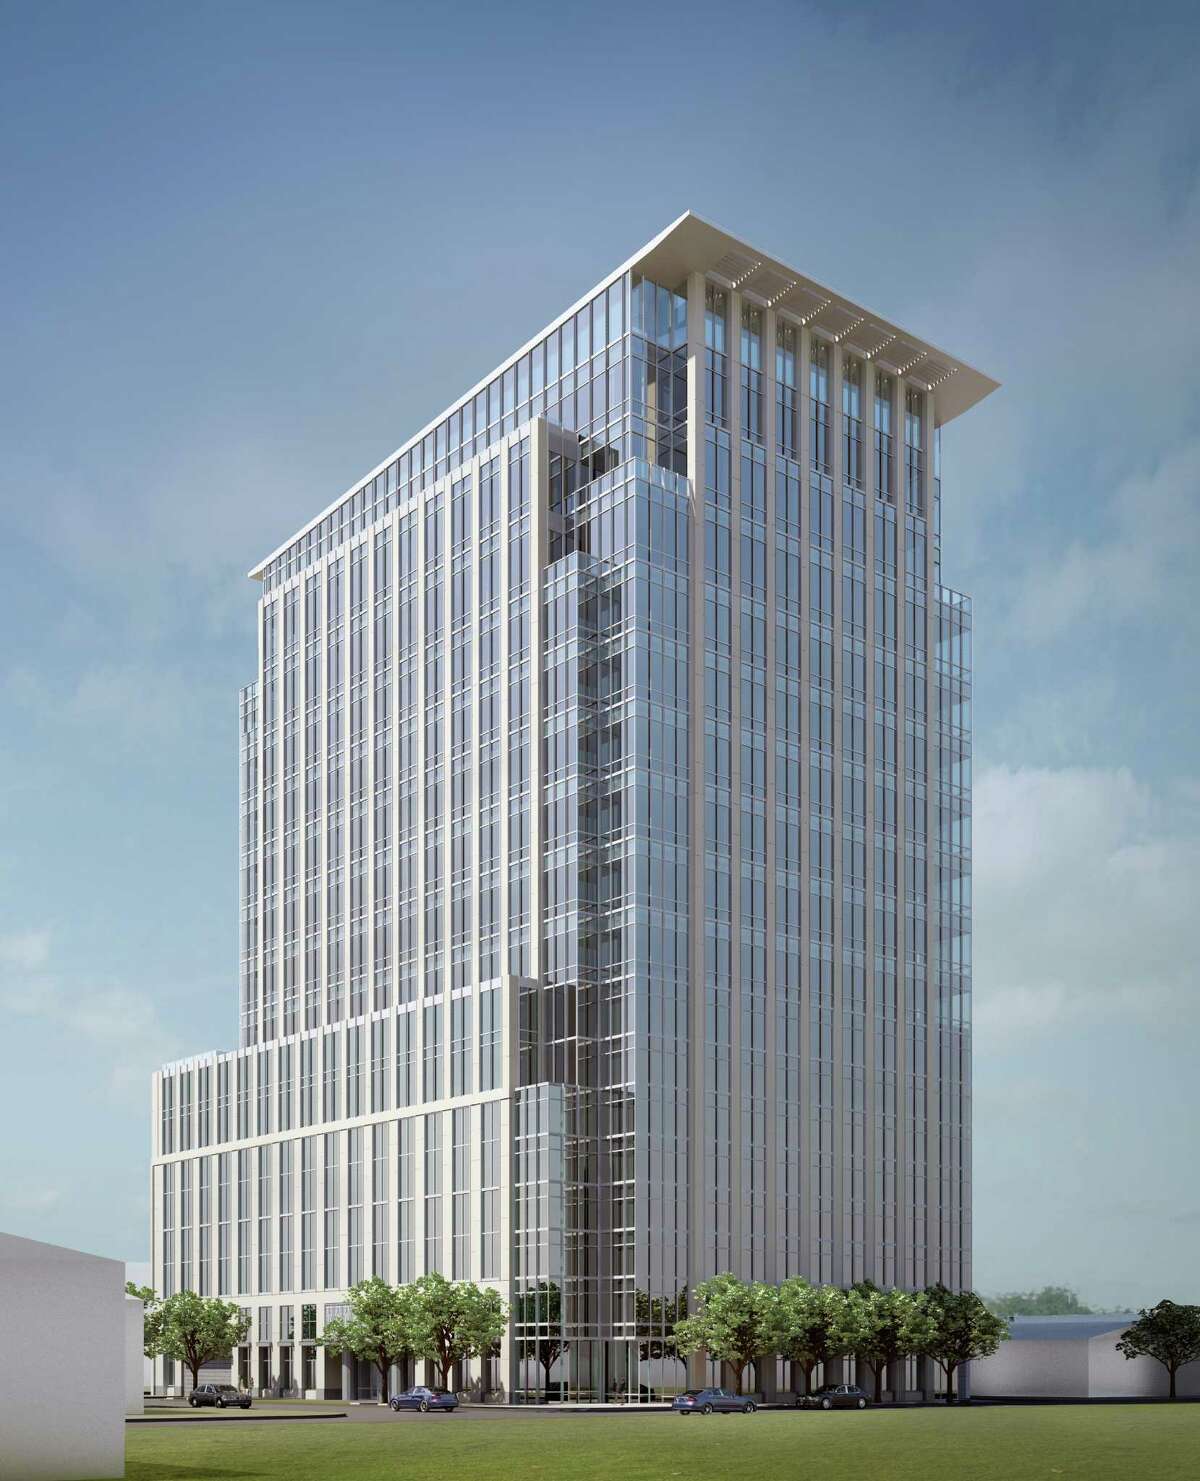 The Hines office tower to be built at 2229 San Felipe, shown in a rendering, is to be 17 stories tall, with eight floors for parking.